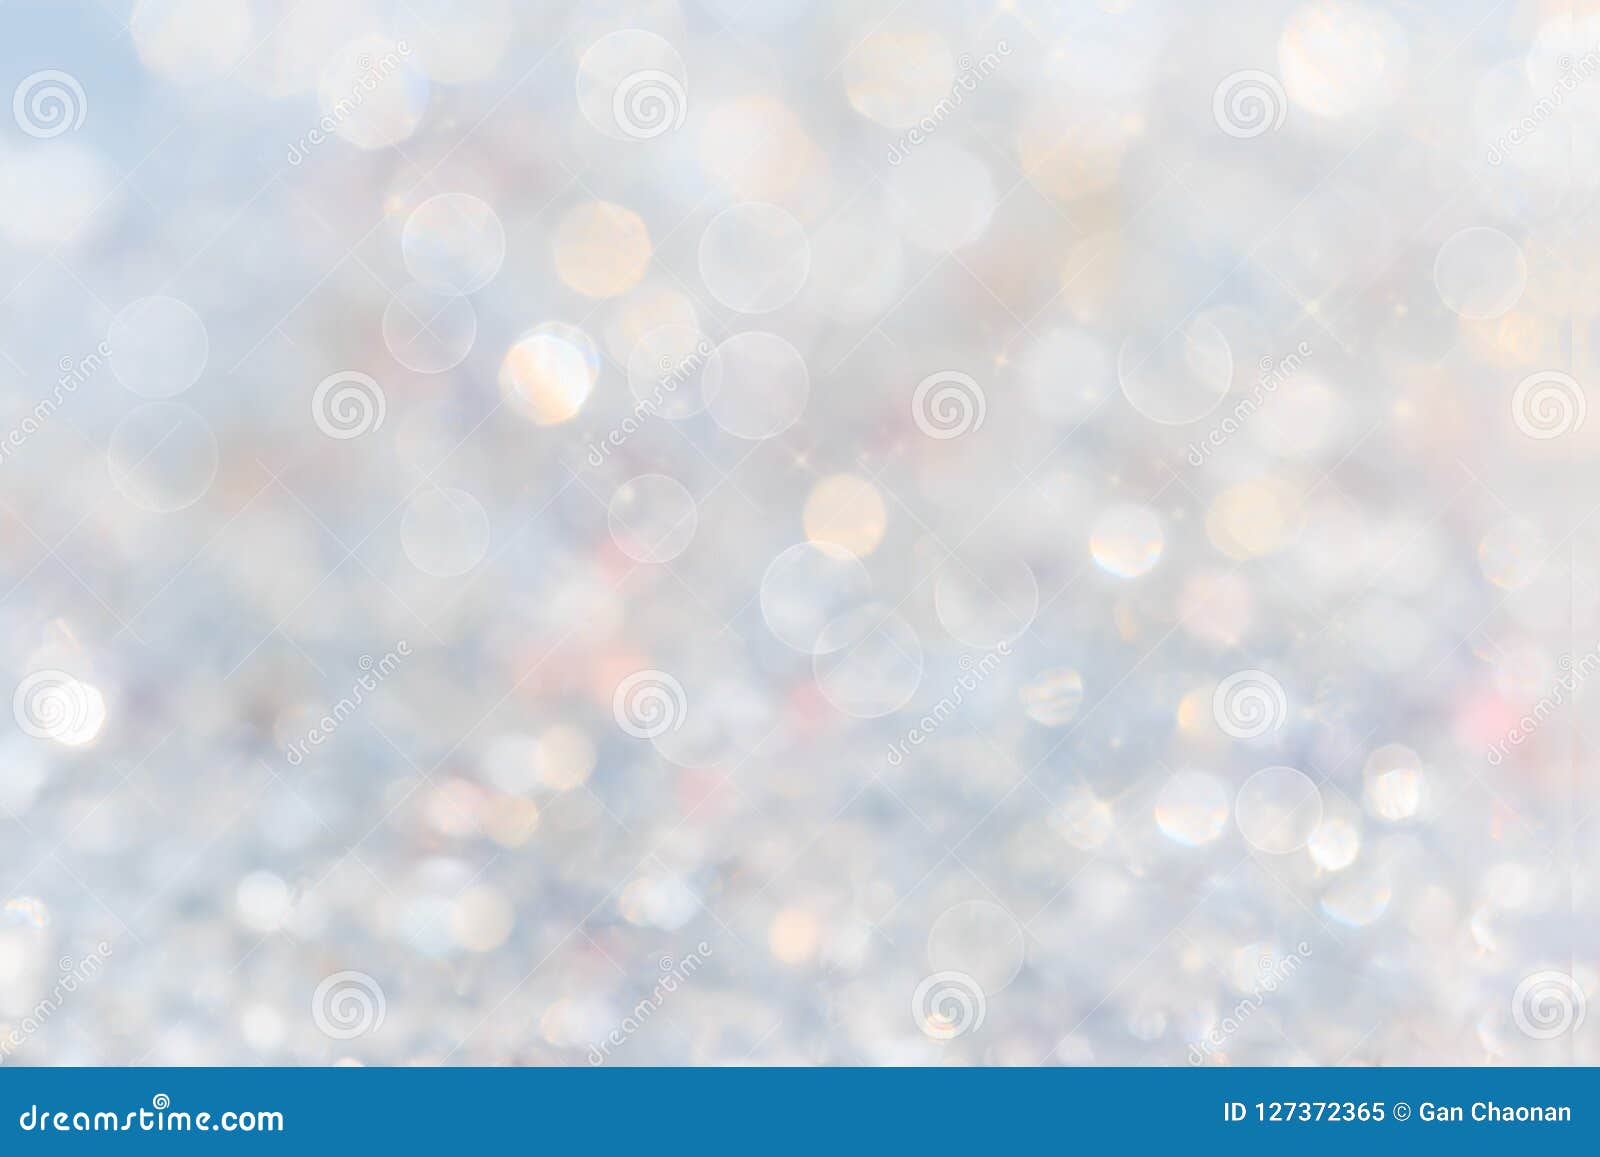 silver and white bokeh lights defocused. abstract background. white blur abstract background.